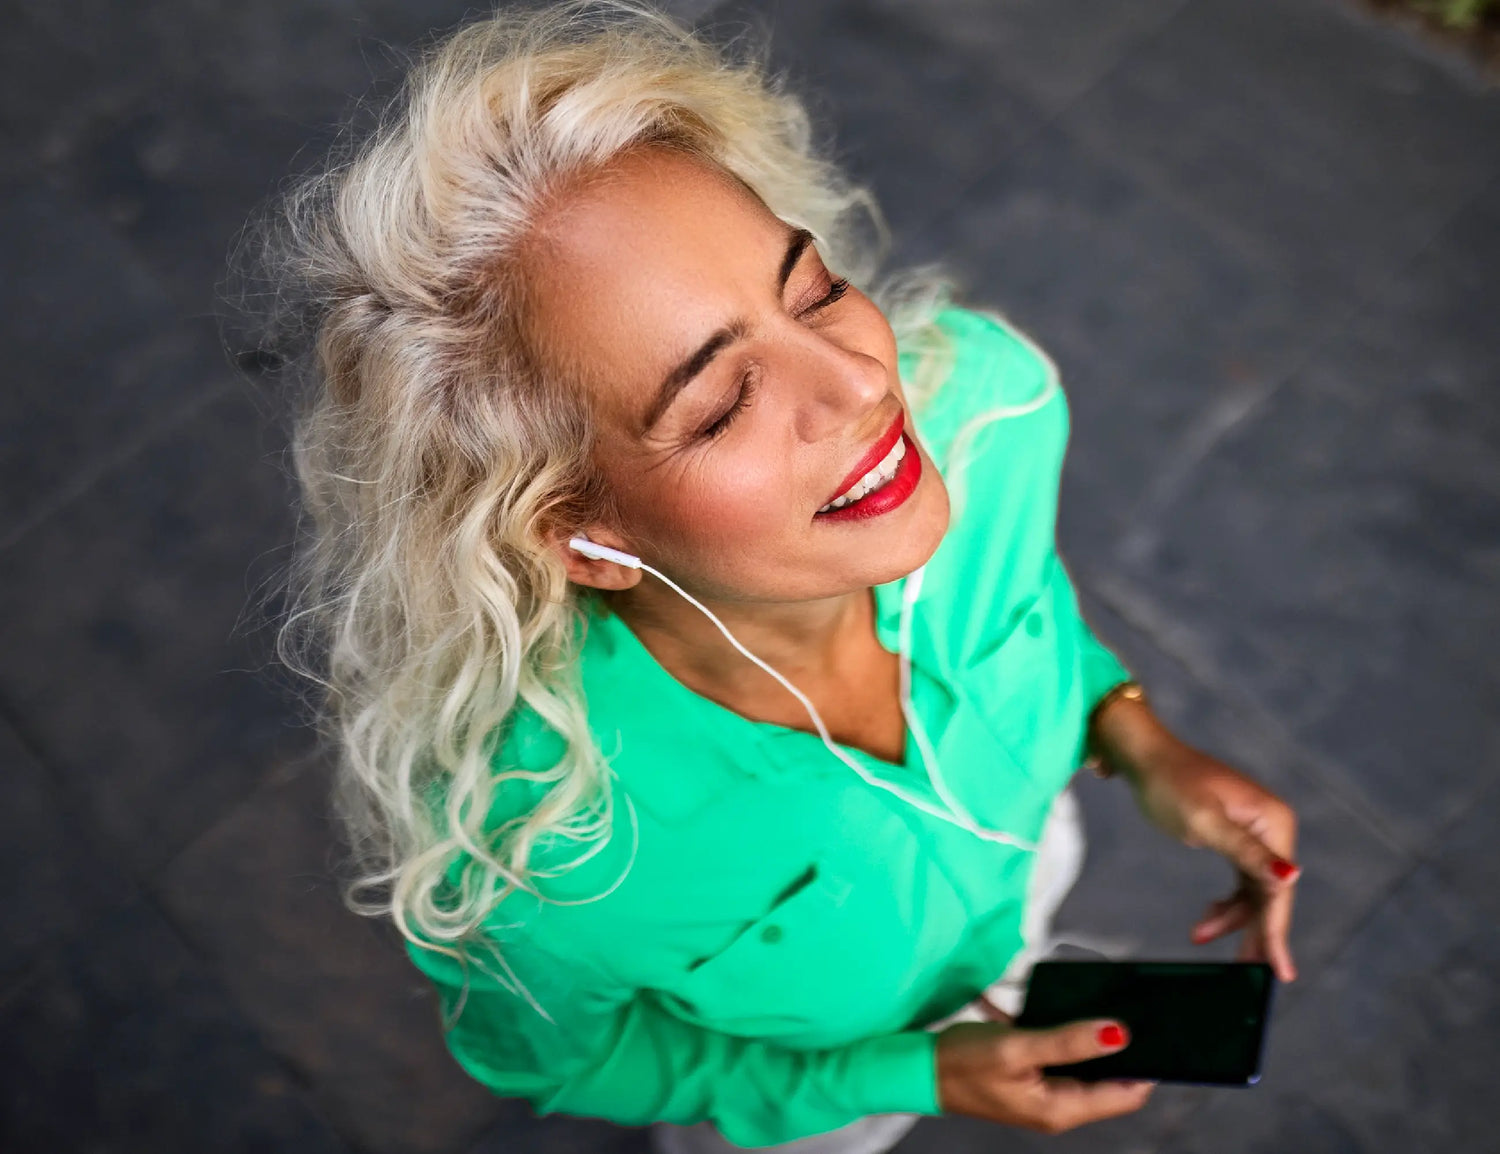 aerial view of a blonde lady in a green shirt listening to music